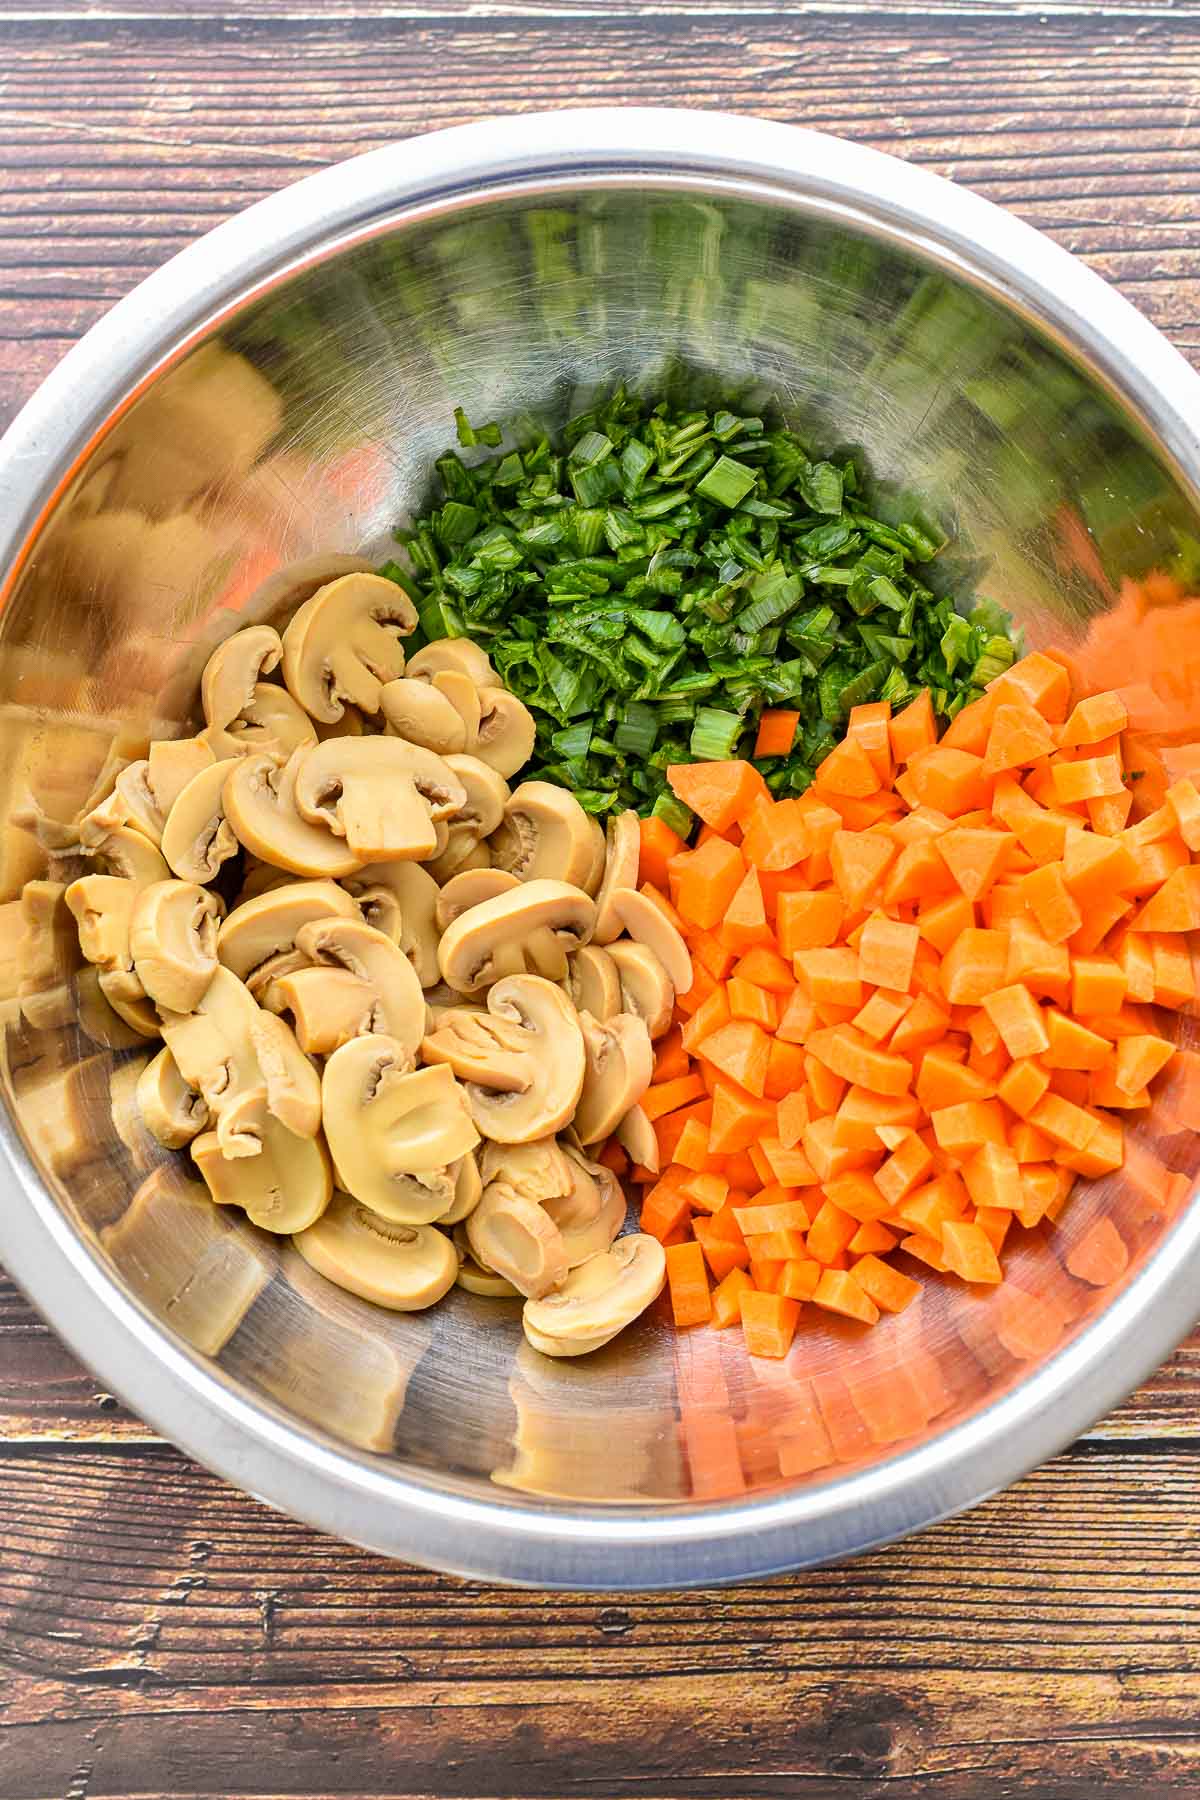 sliced canned mushrooms, finely chopped leek greens and carrots in a large mixing bowl prior to cooking.